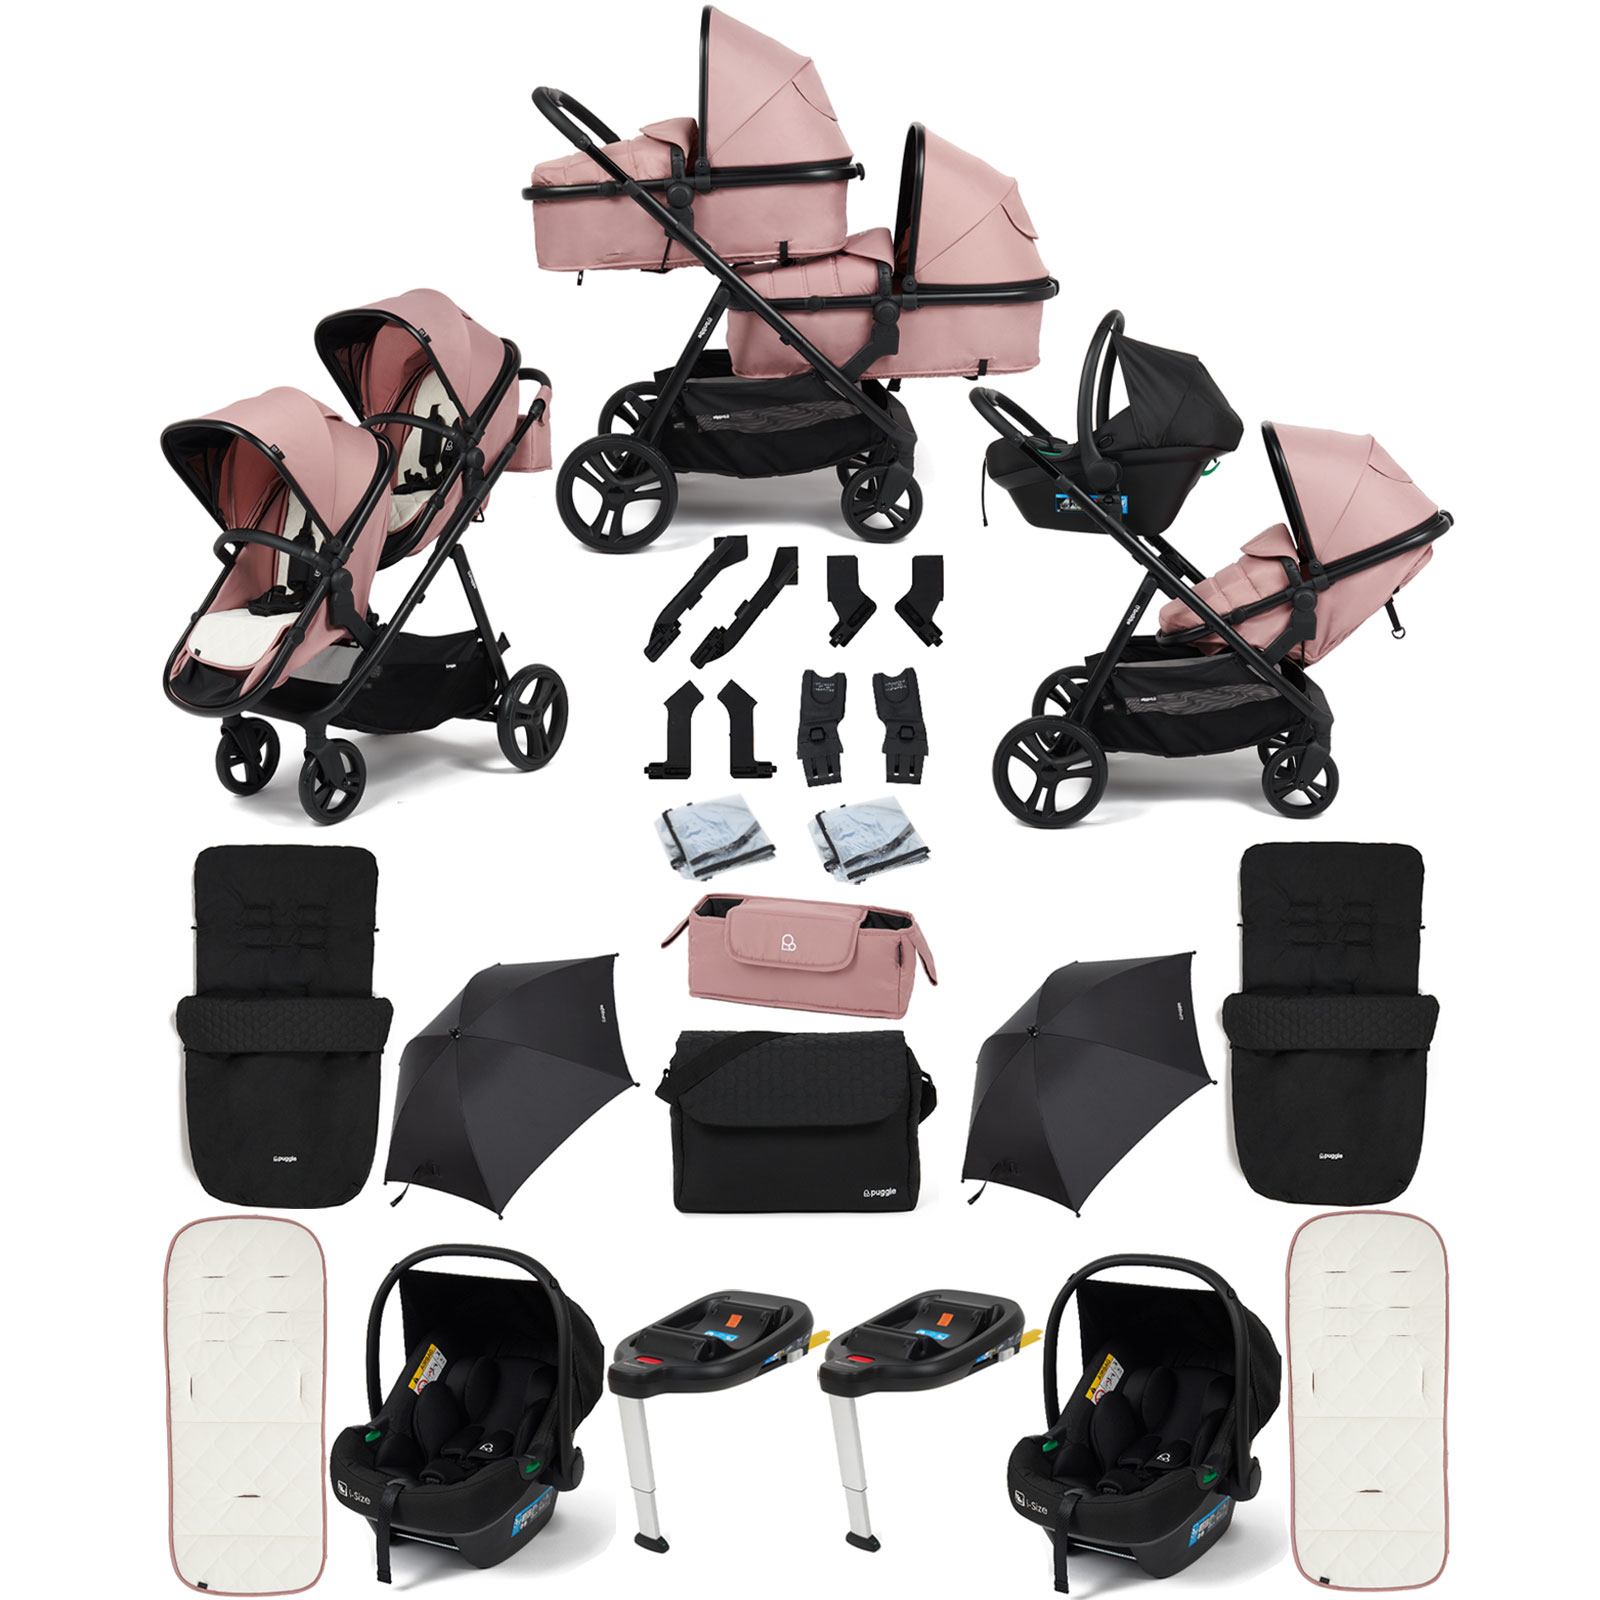 Puggle Memphis 2-in-1 Duo Double Travel System with 2 i-Size Car Seats, 2 ISOFIX Bases, 2 Footmuffs, 2 Parasols, and Changing Bag - Dusk Pink